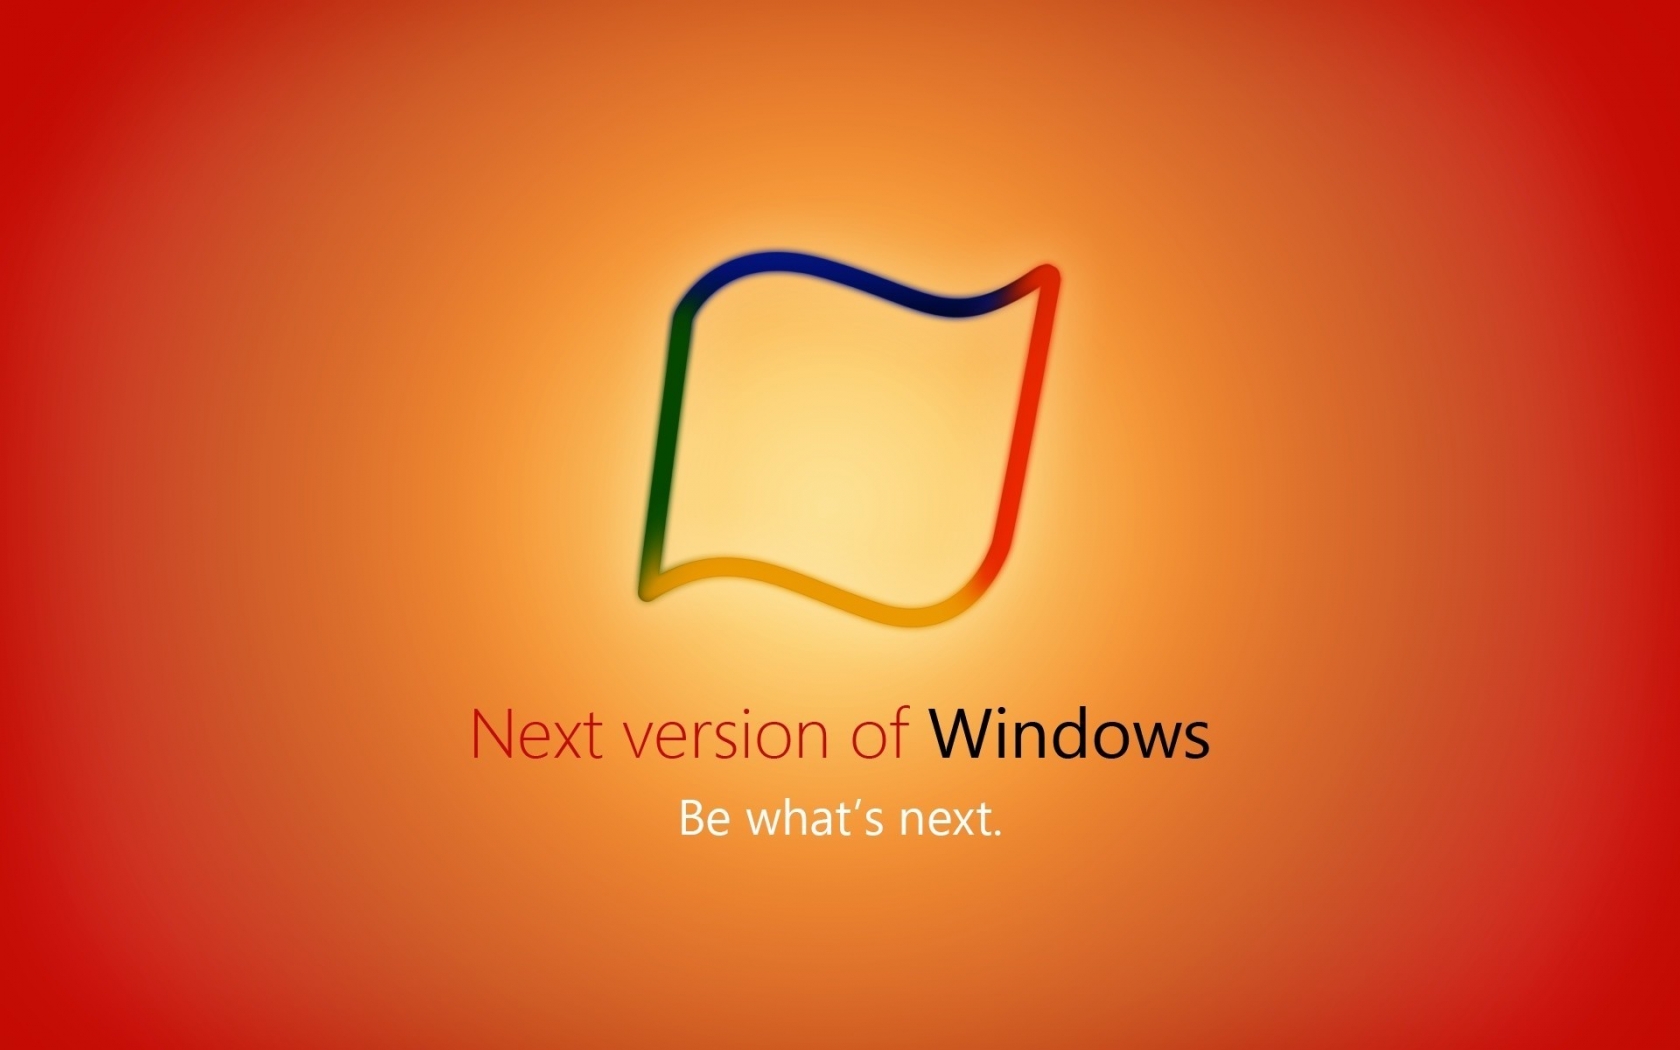 Next Version of Windows for 1680 x 1050 widescreen resolution